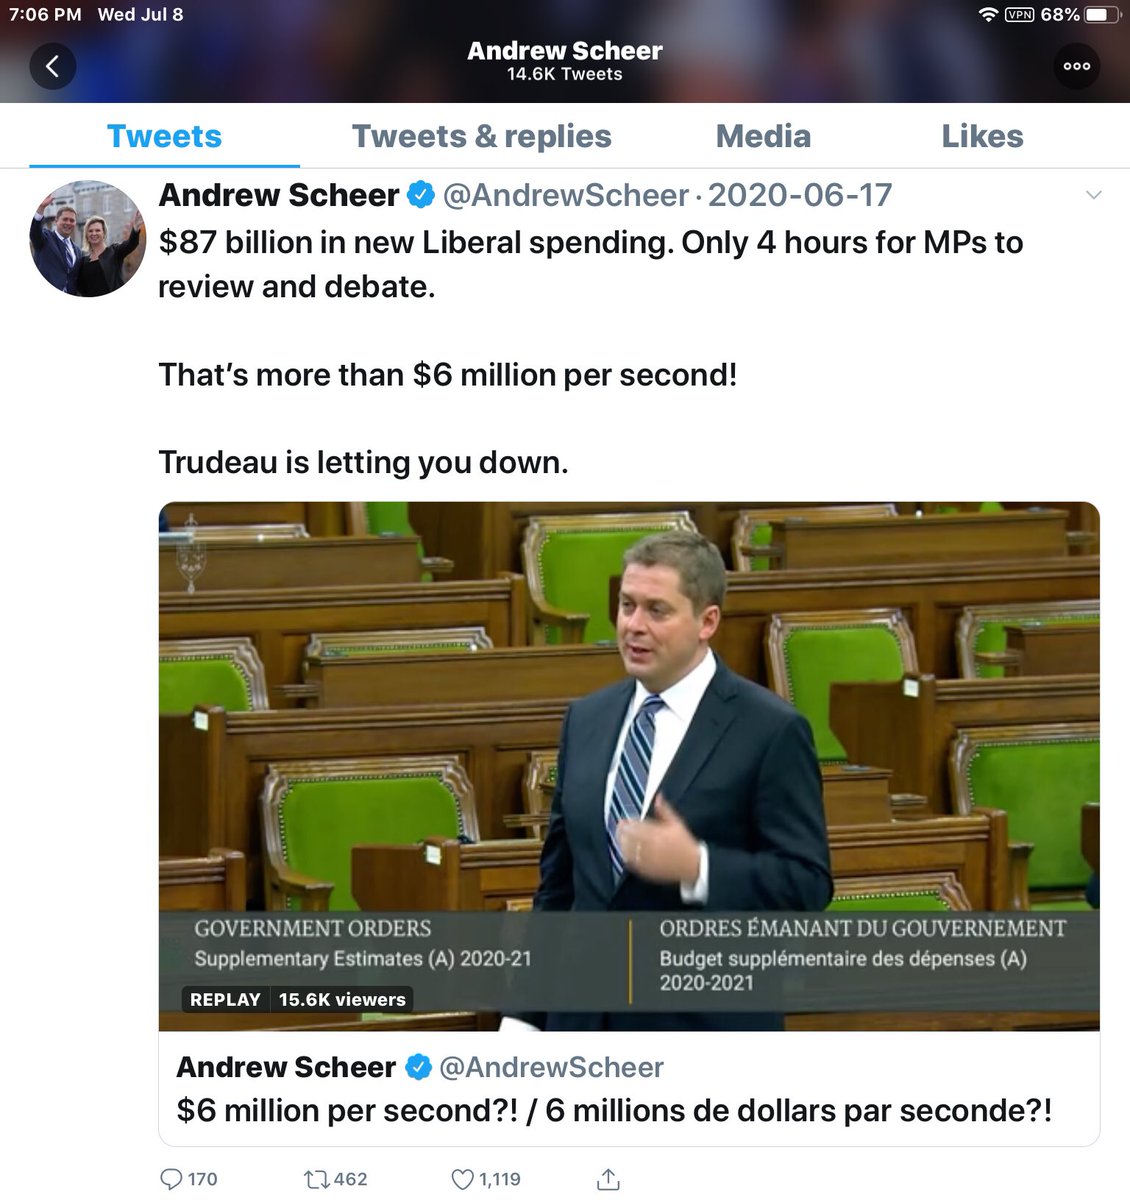 So, I thought I would attach some proof for anyone struggling to accept the accusation.This is the political environment immediately prior to the attempted assassination of PMJT. Screen shots of Scheer twitter site. Word for word match of perpetrators list of complaints.